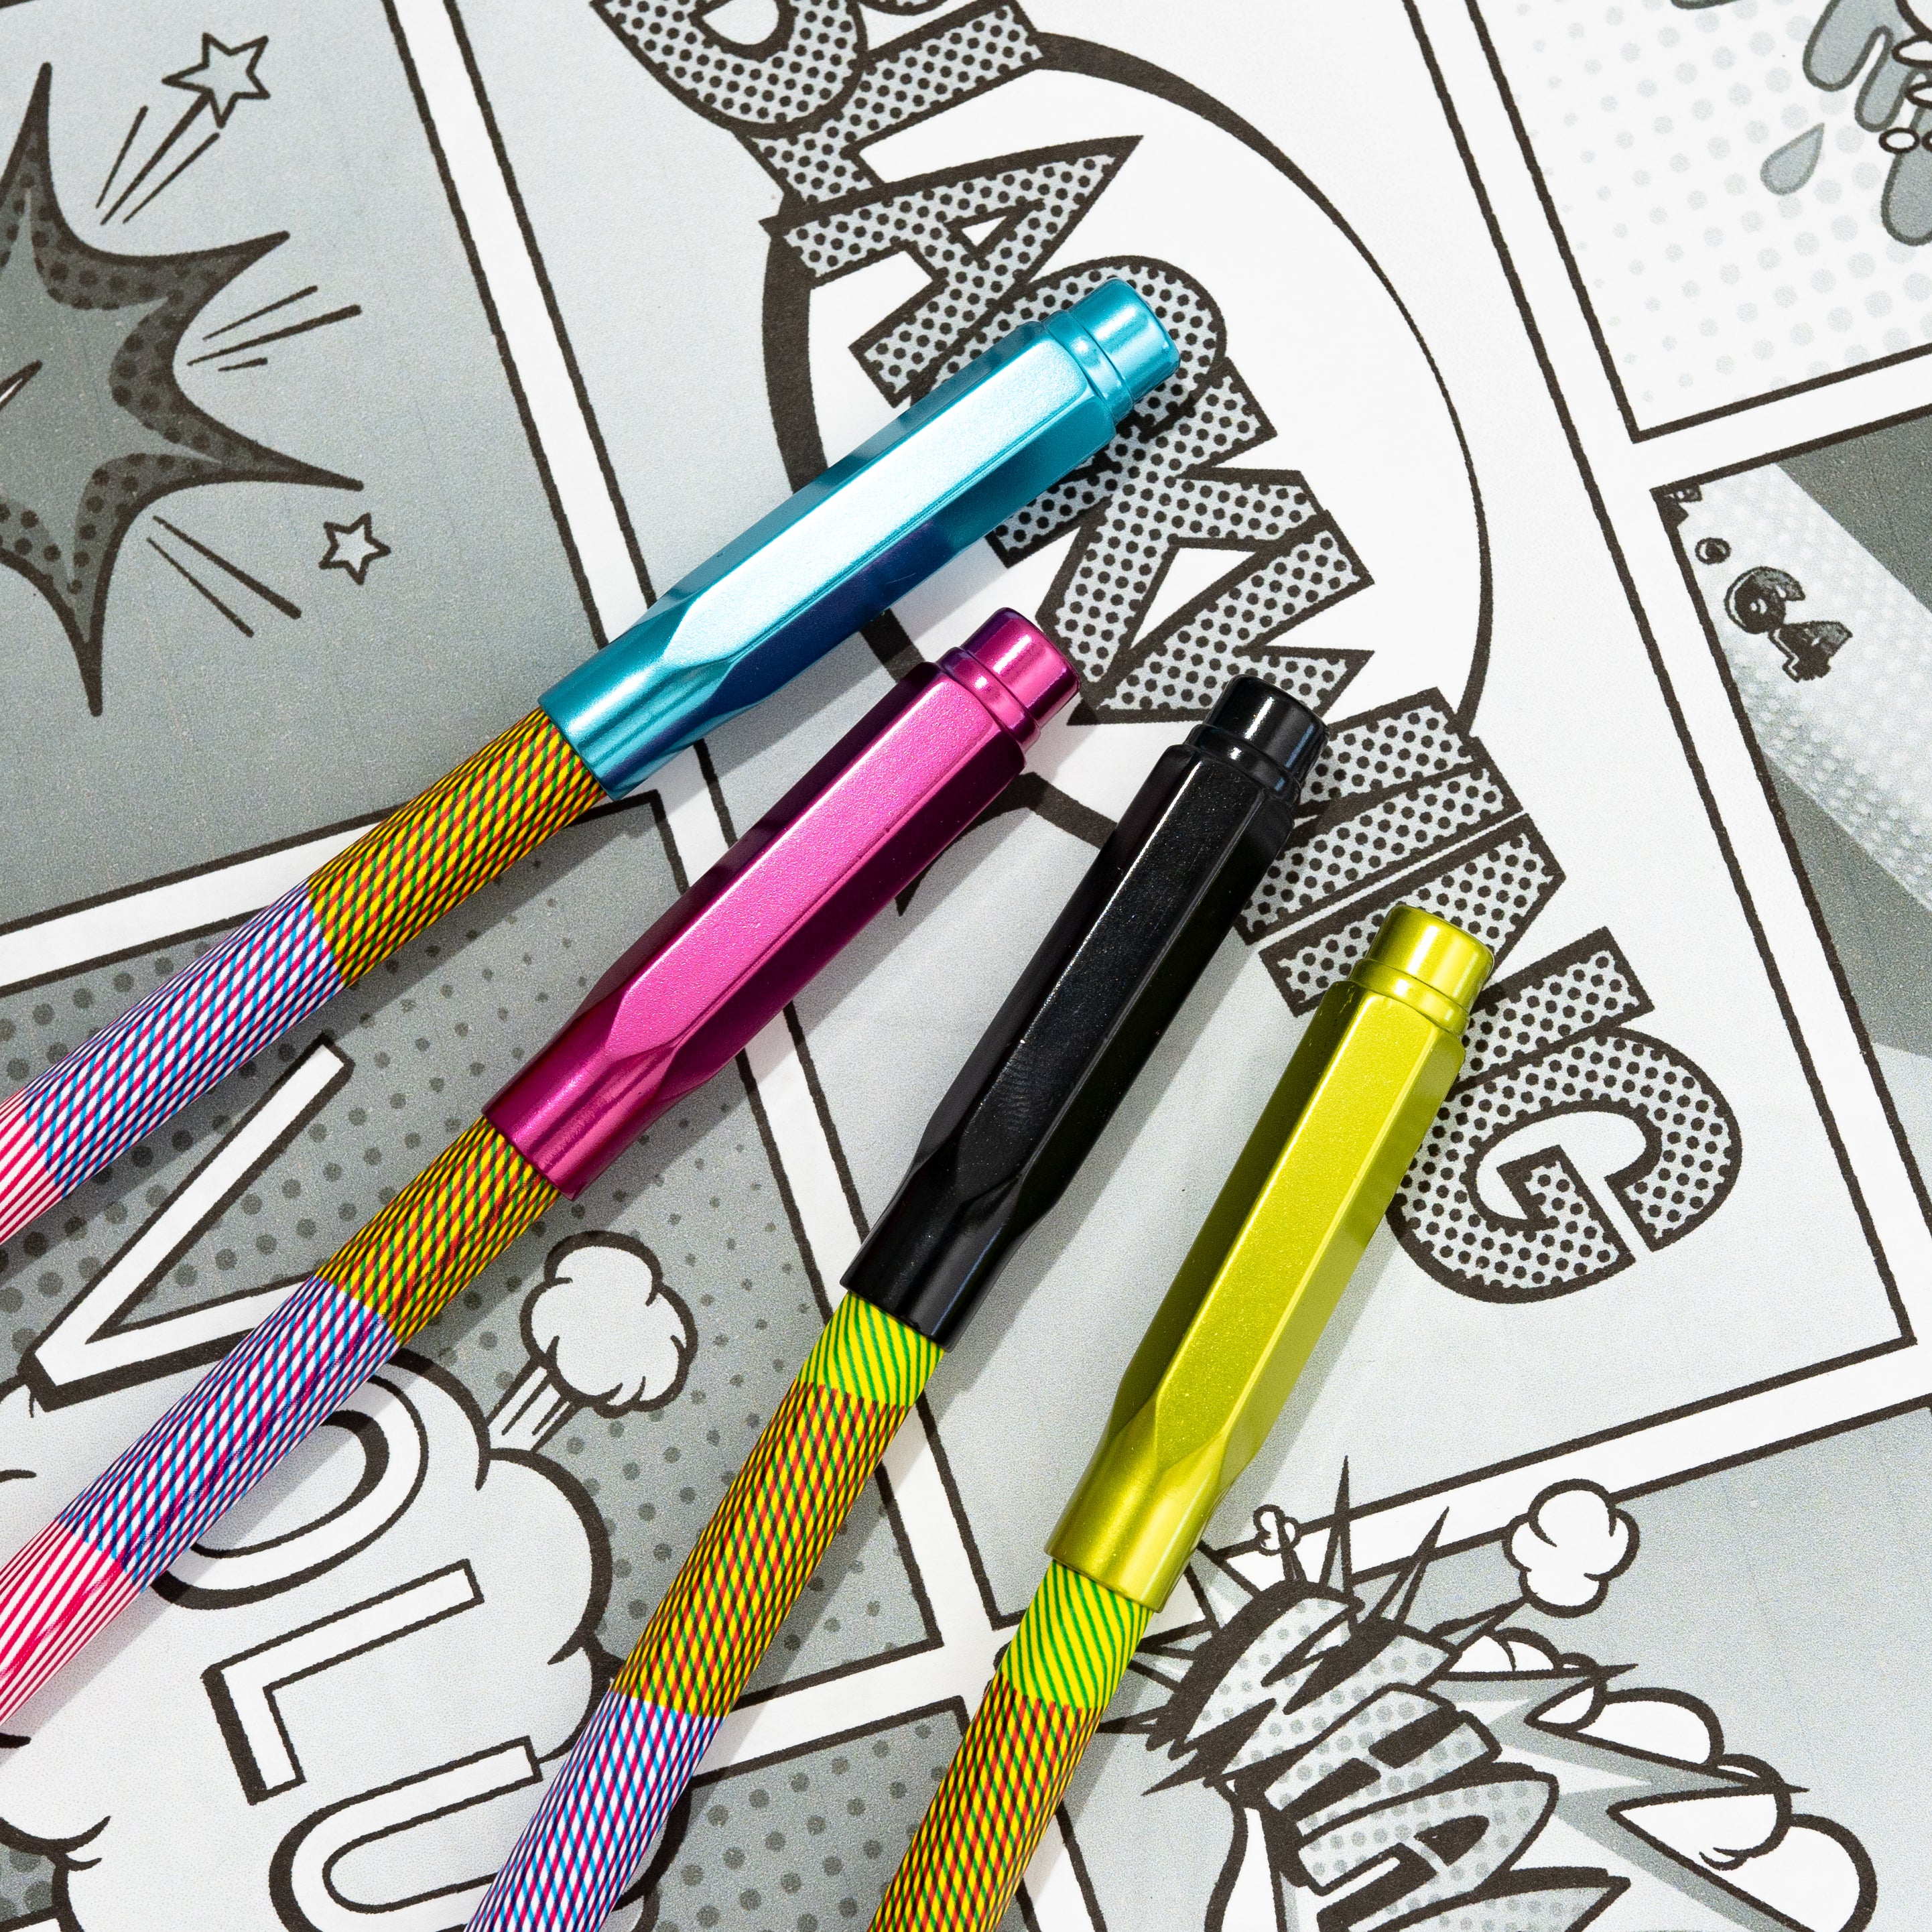 Three Blackwing Volume 64 Point Guards (Set of 4) lying on an open notebook with comic books graphics.